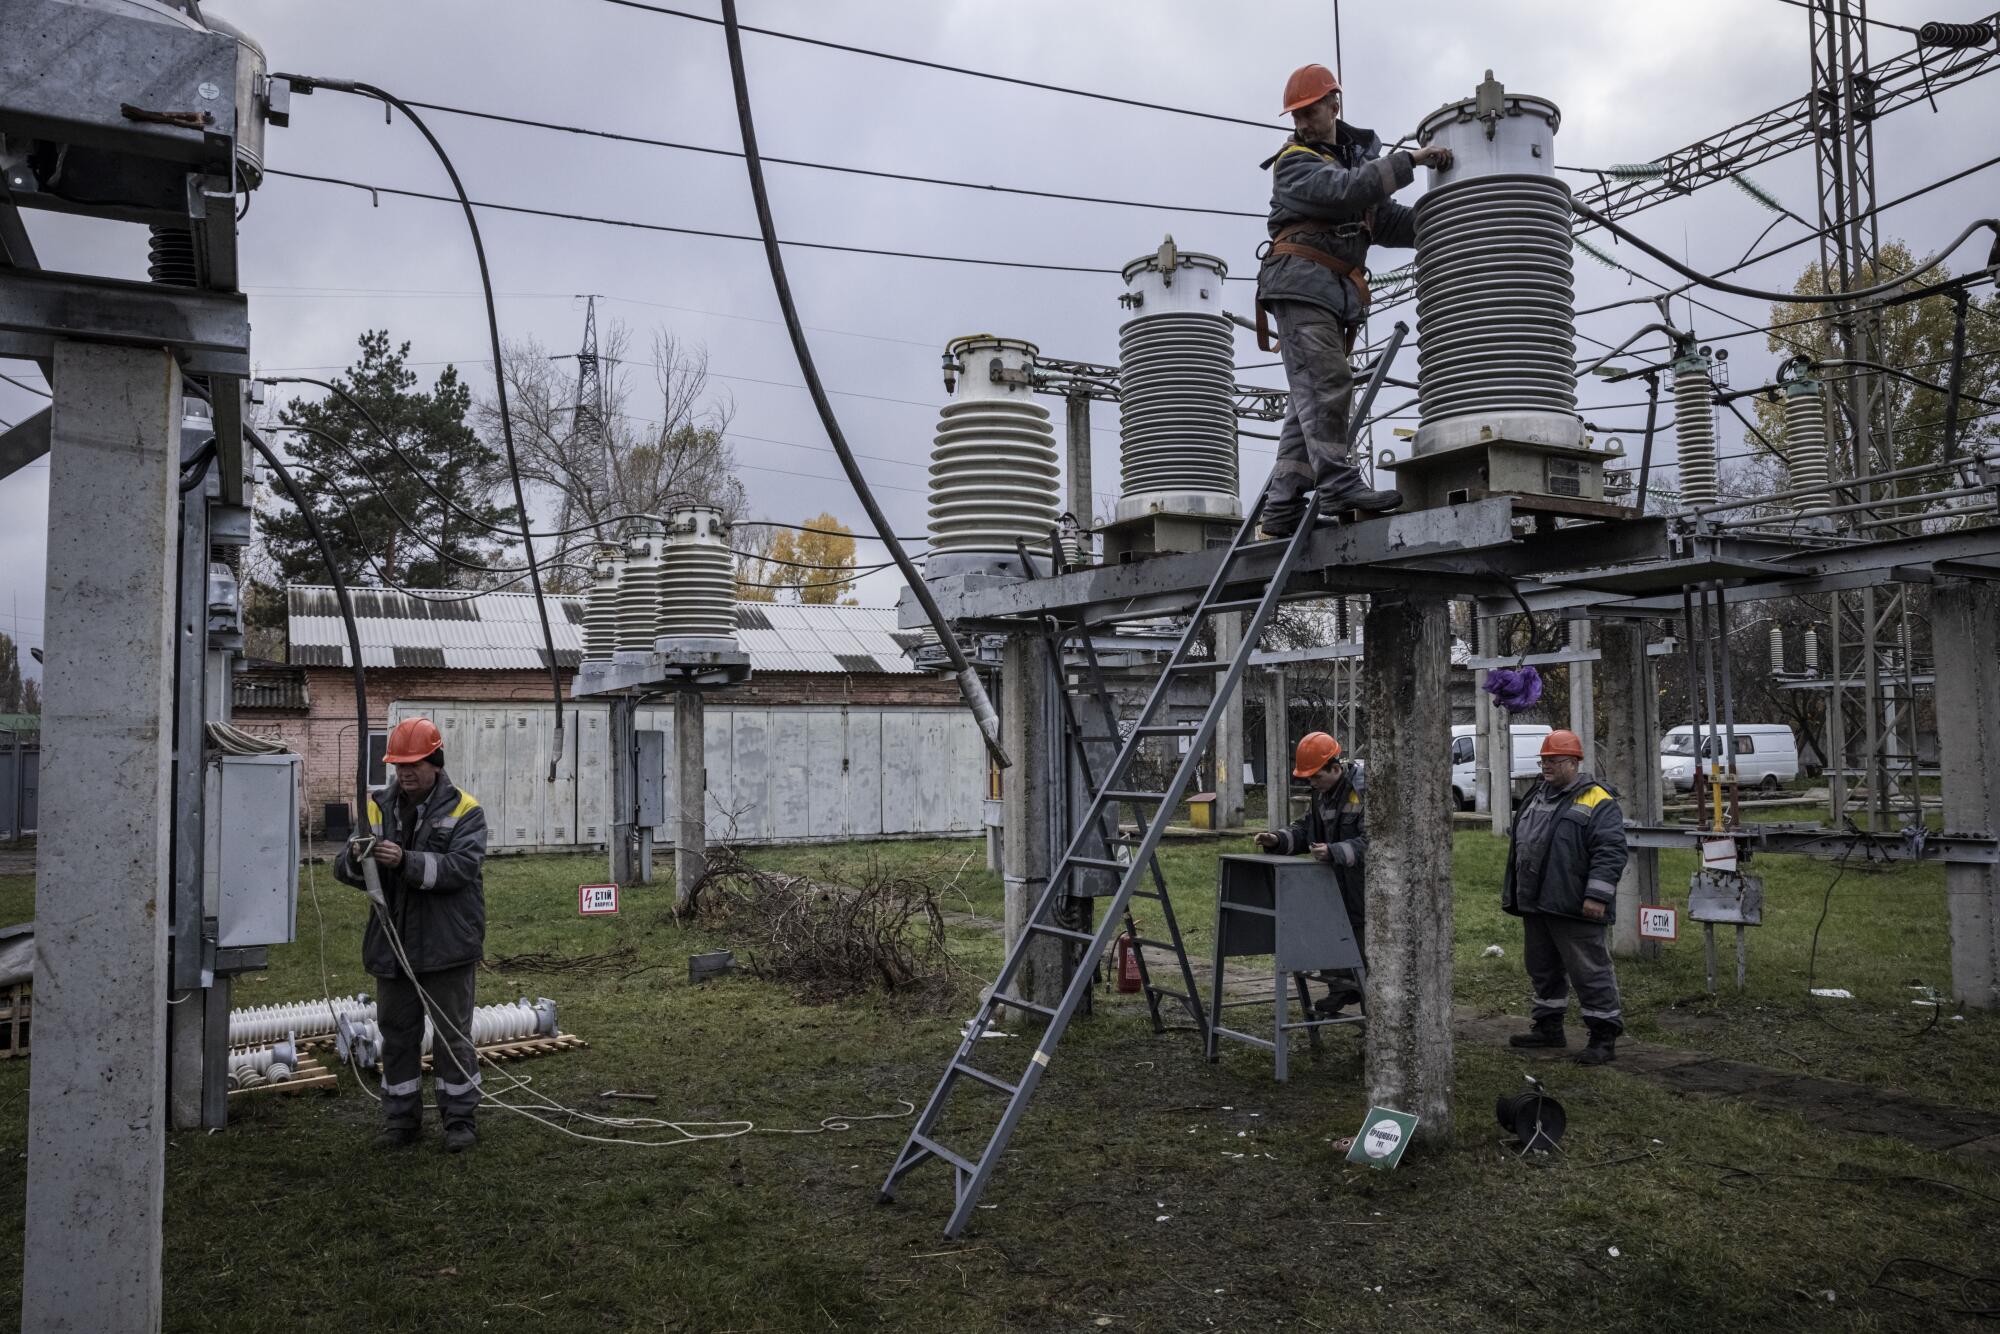 Workers repair a power station.